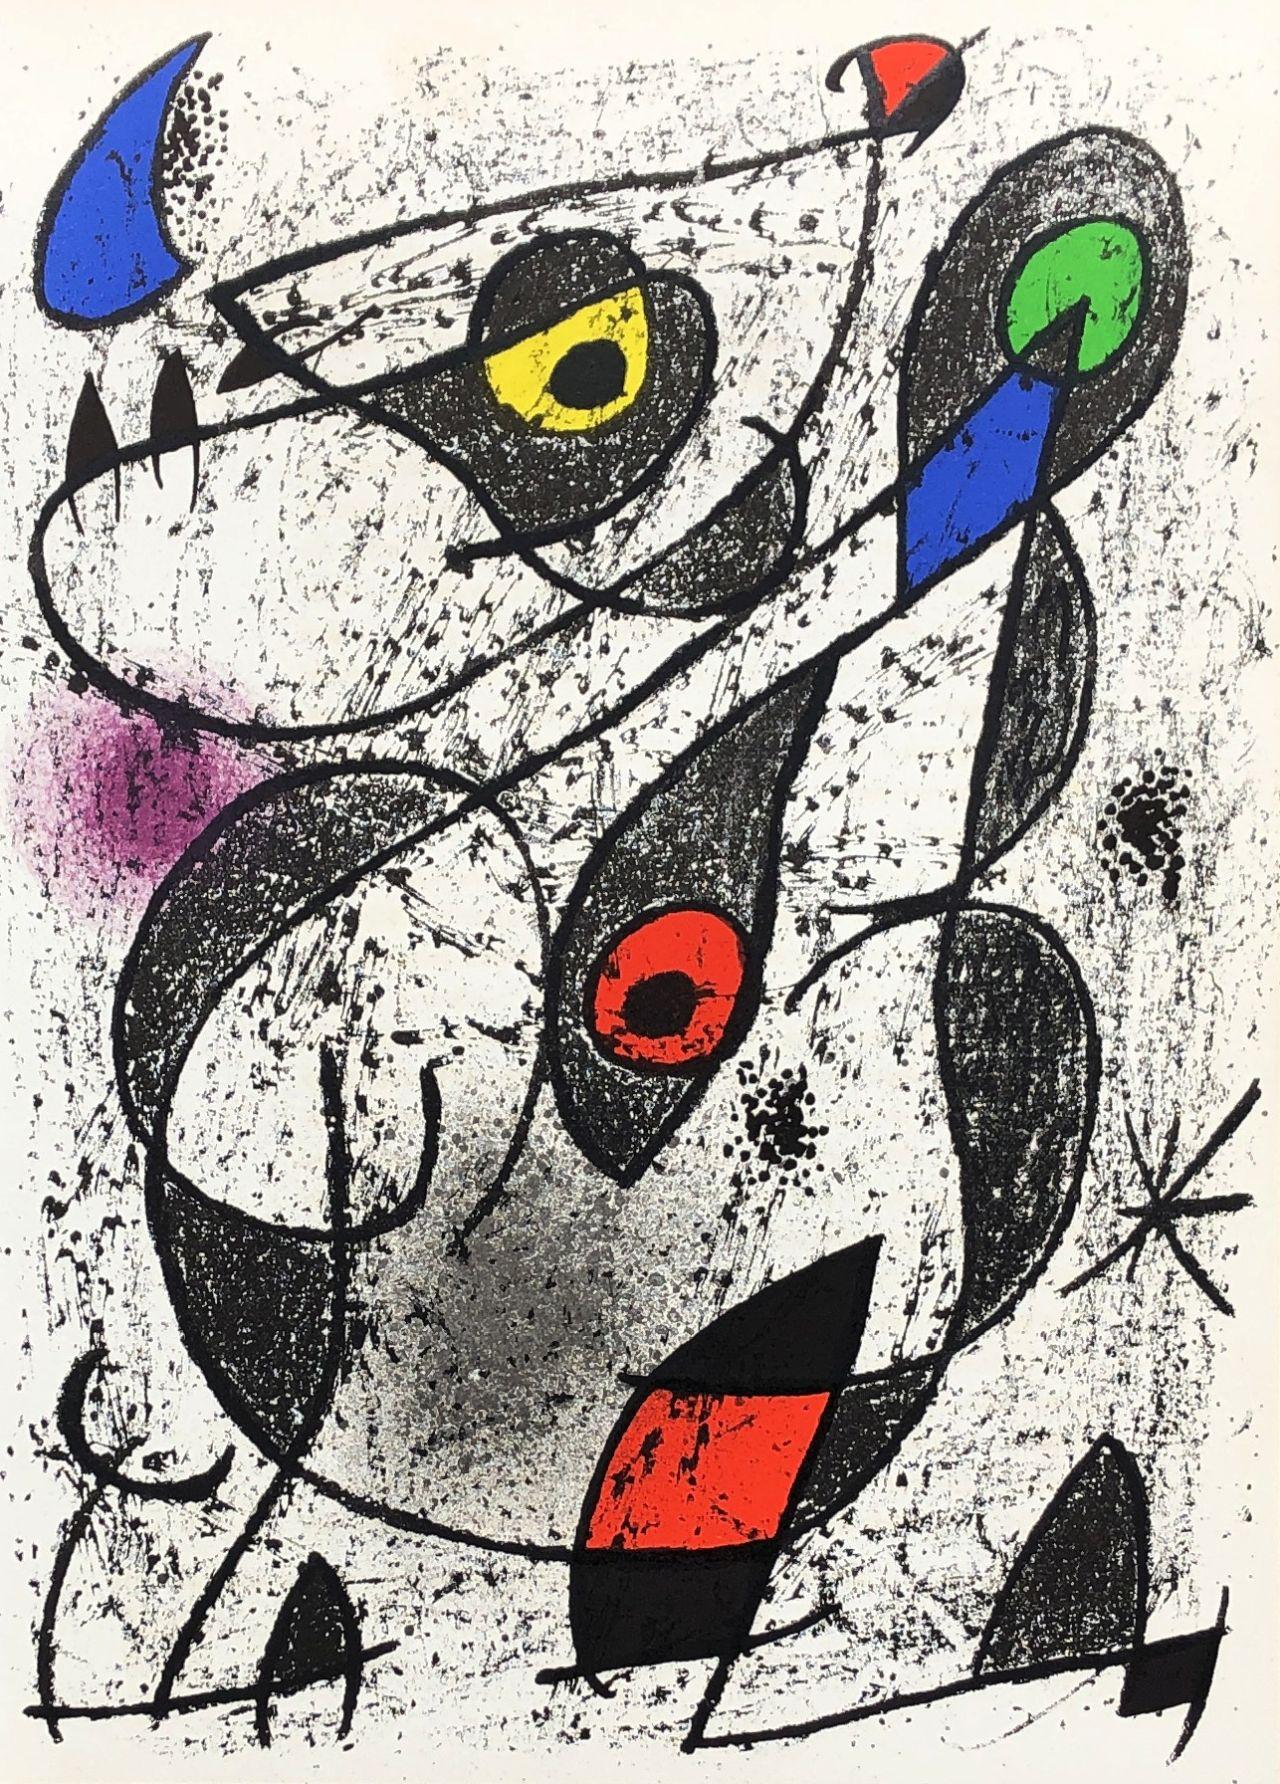 Joan Miró Abstract Print - Two Flying Birds - Original Lithograph (Mourlot #838)